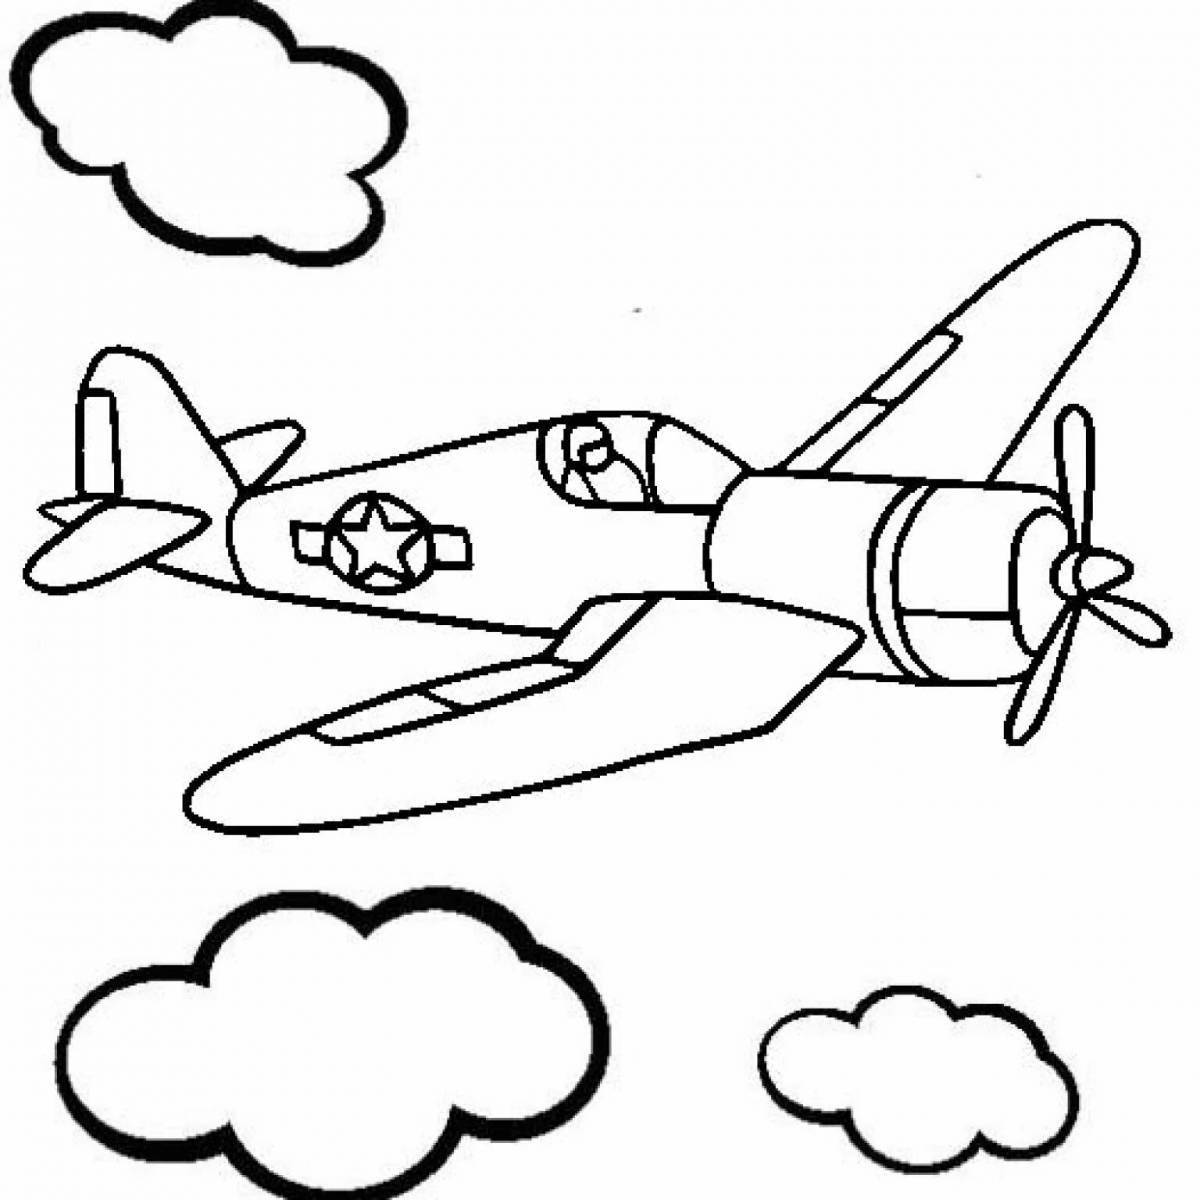 Dynamic children's military coloring book